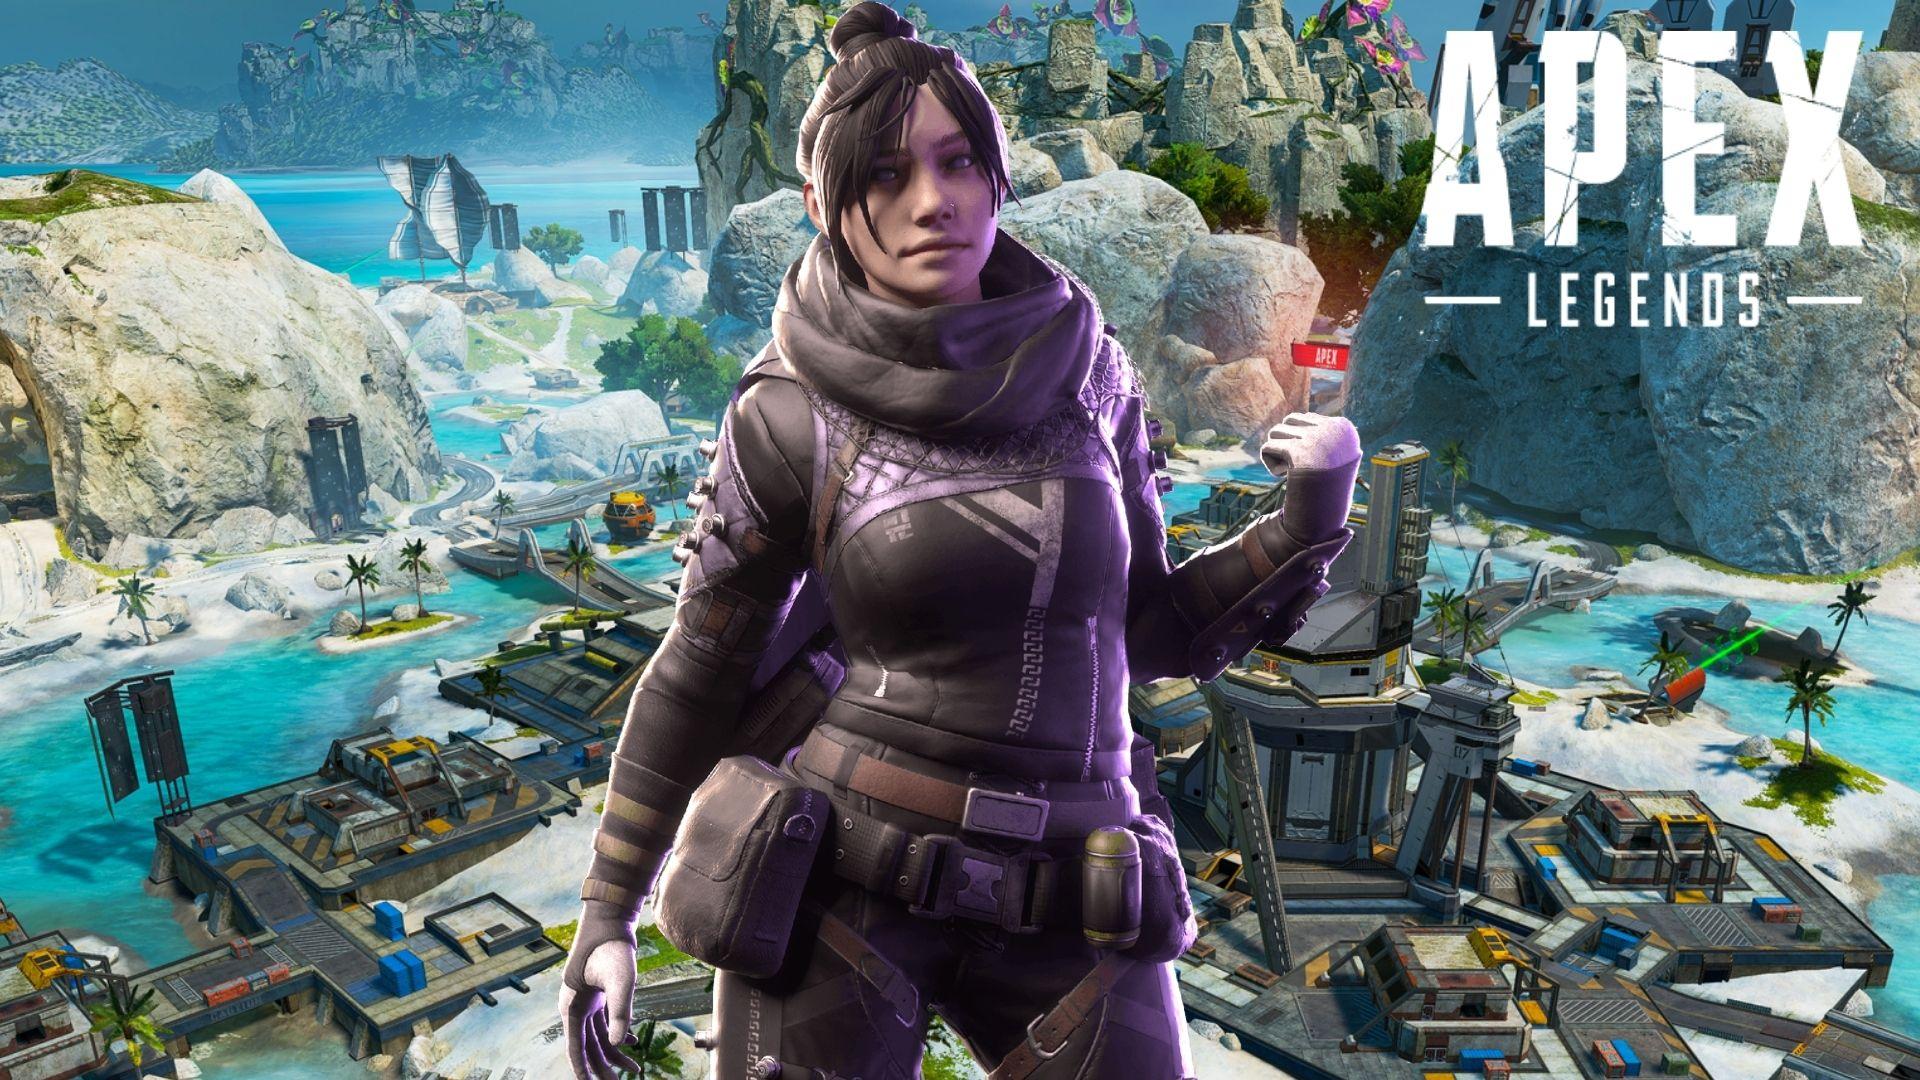 Wraith stood on Apex Legends Storm Point map